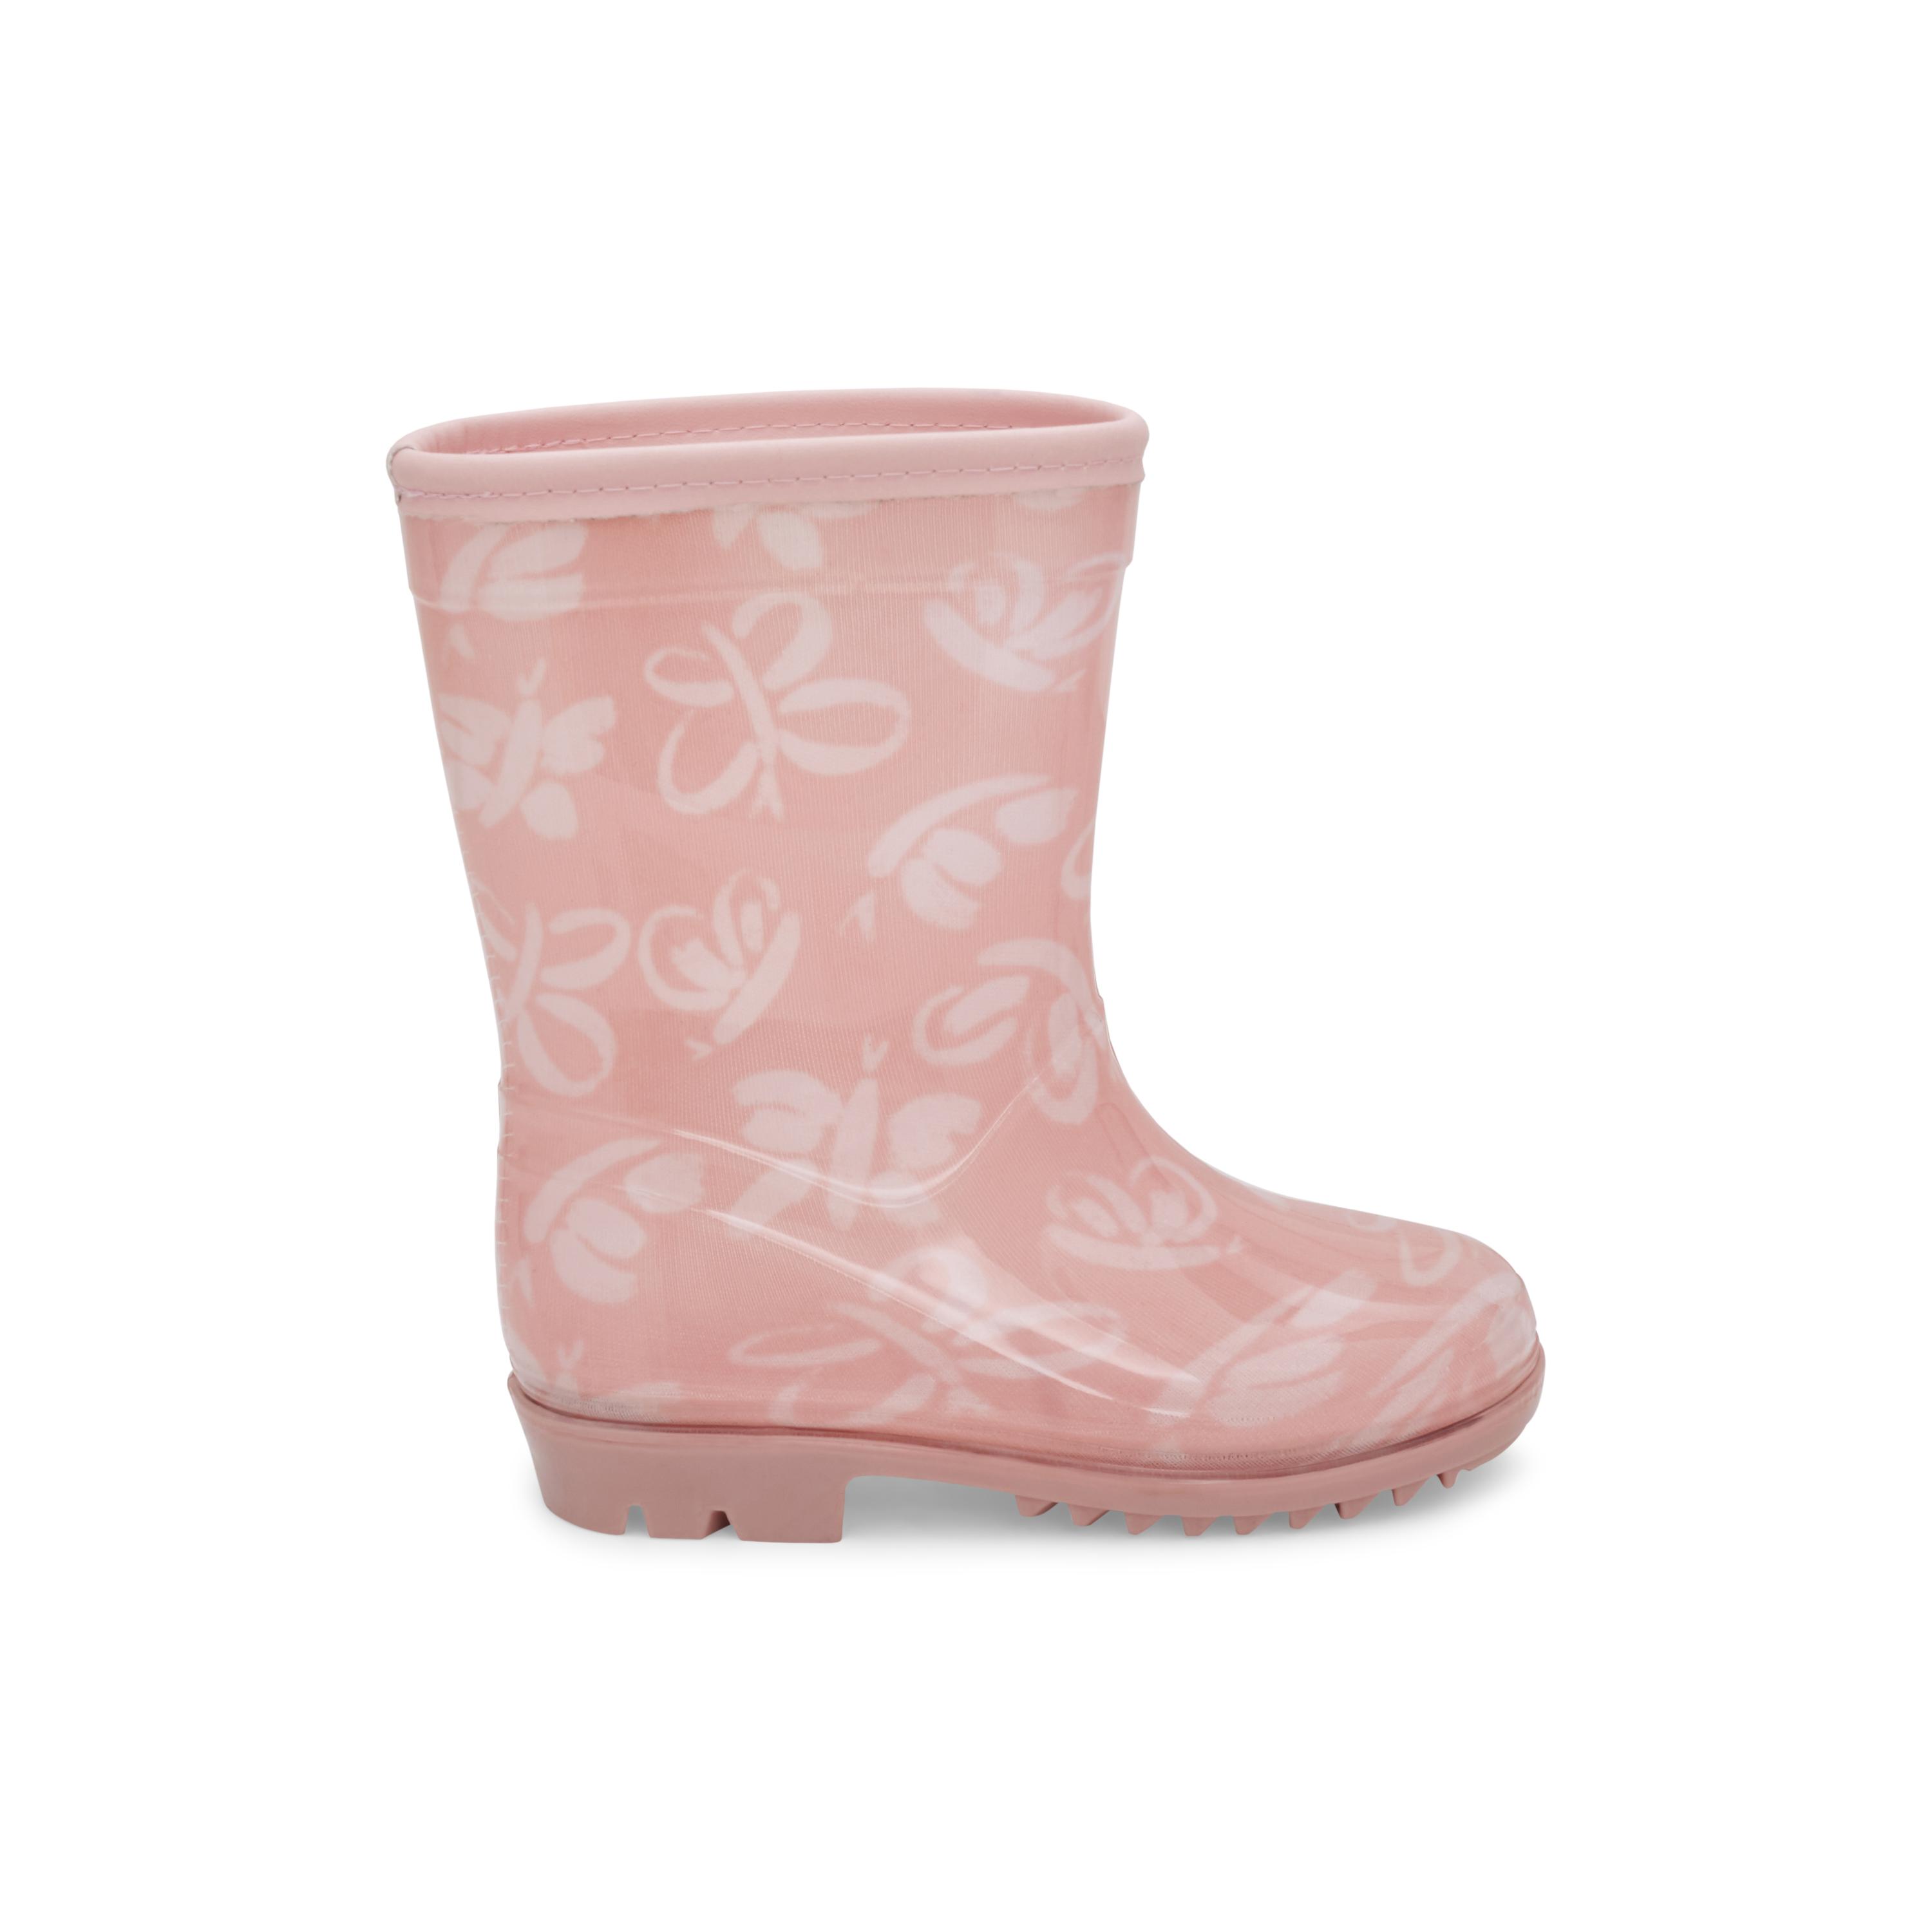 Toddler Butterfly Rain Boots